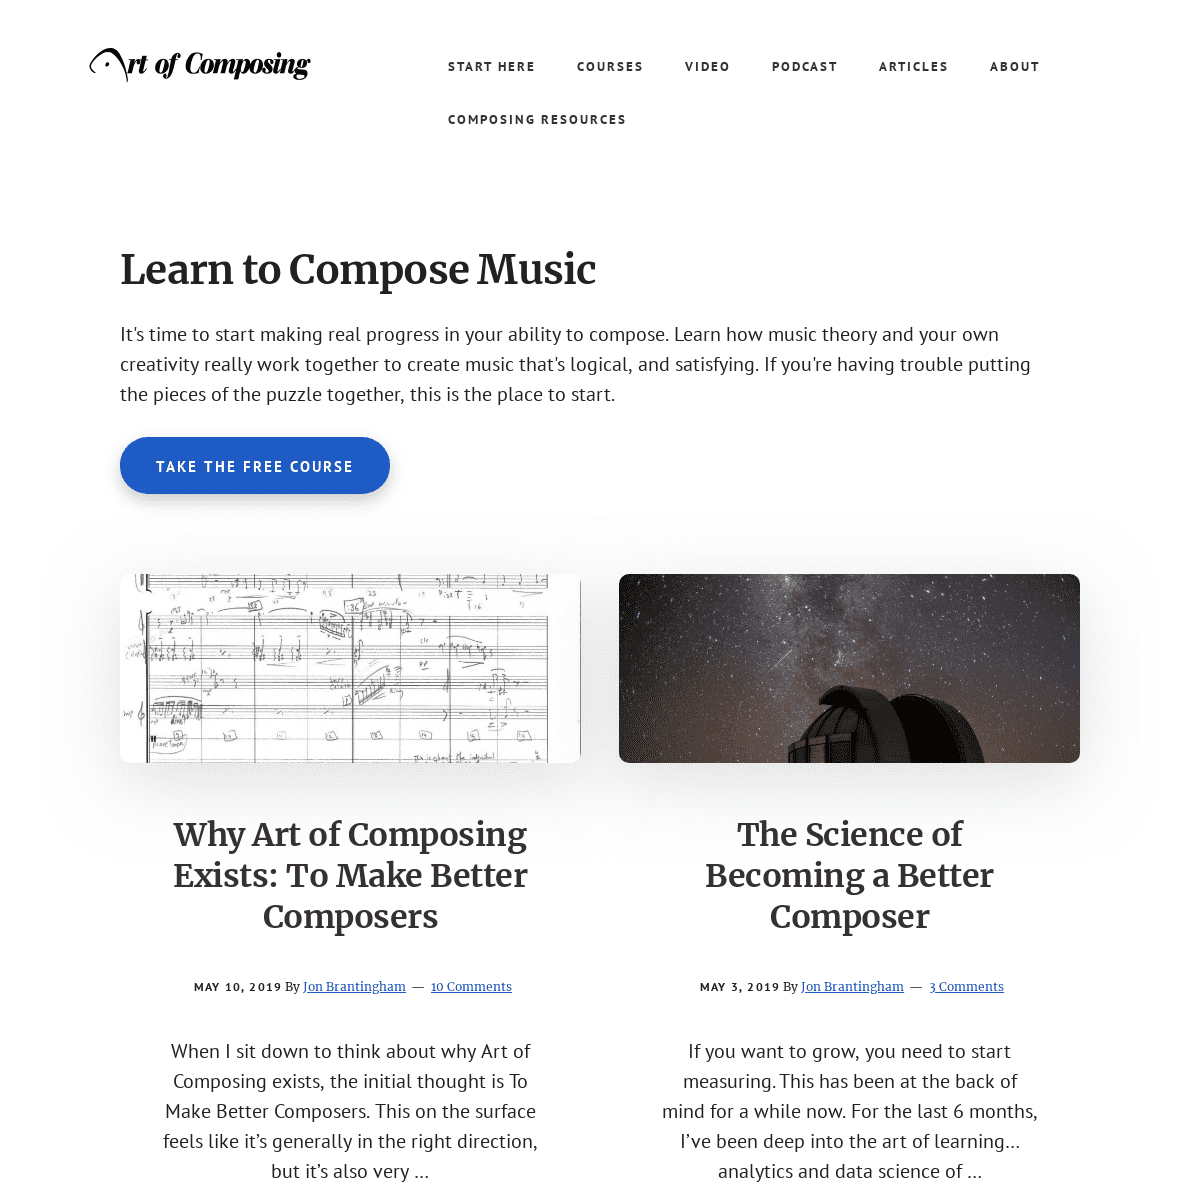 Art of Composing - Let's learn to compose together.